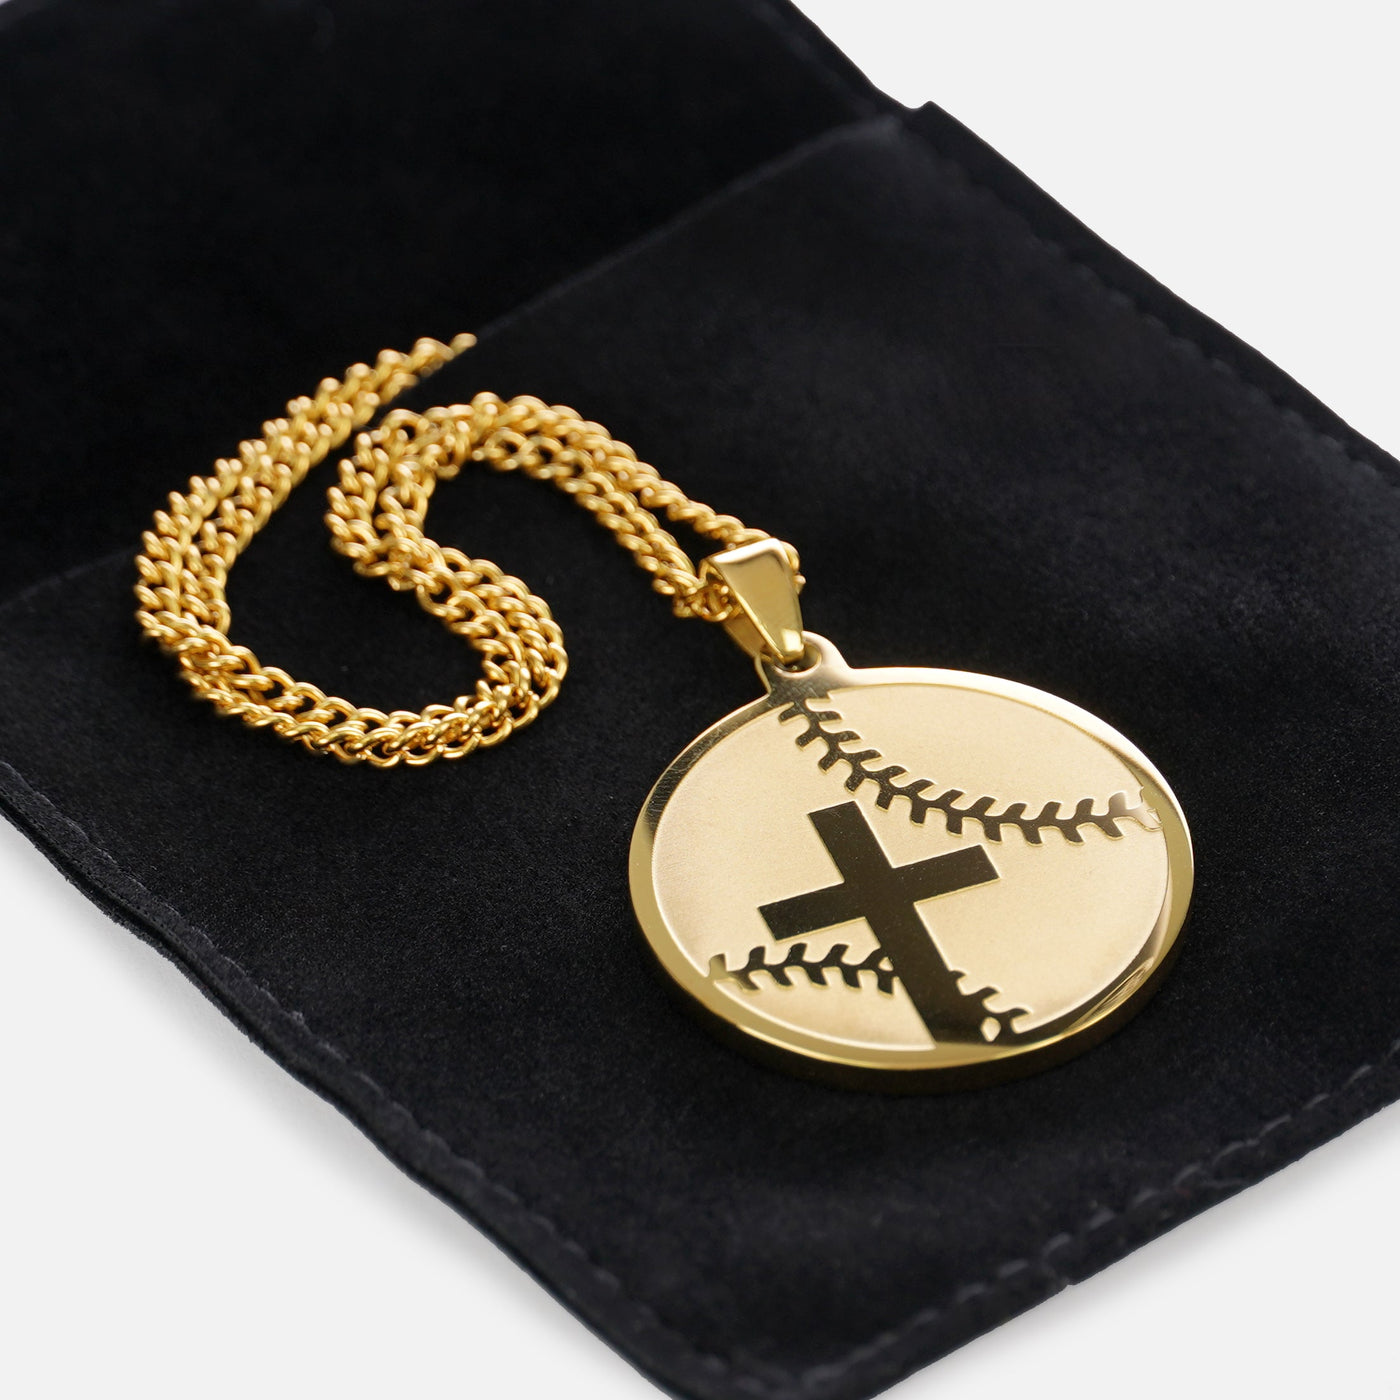 Baseball Faith Cross Pendant with Chain Kids Necklace - Gold Plated Stainless Steel